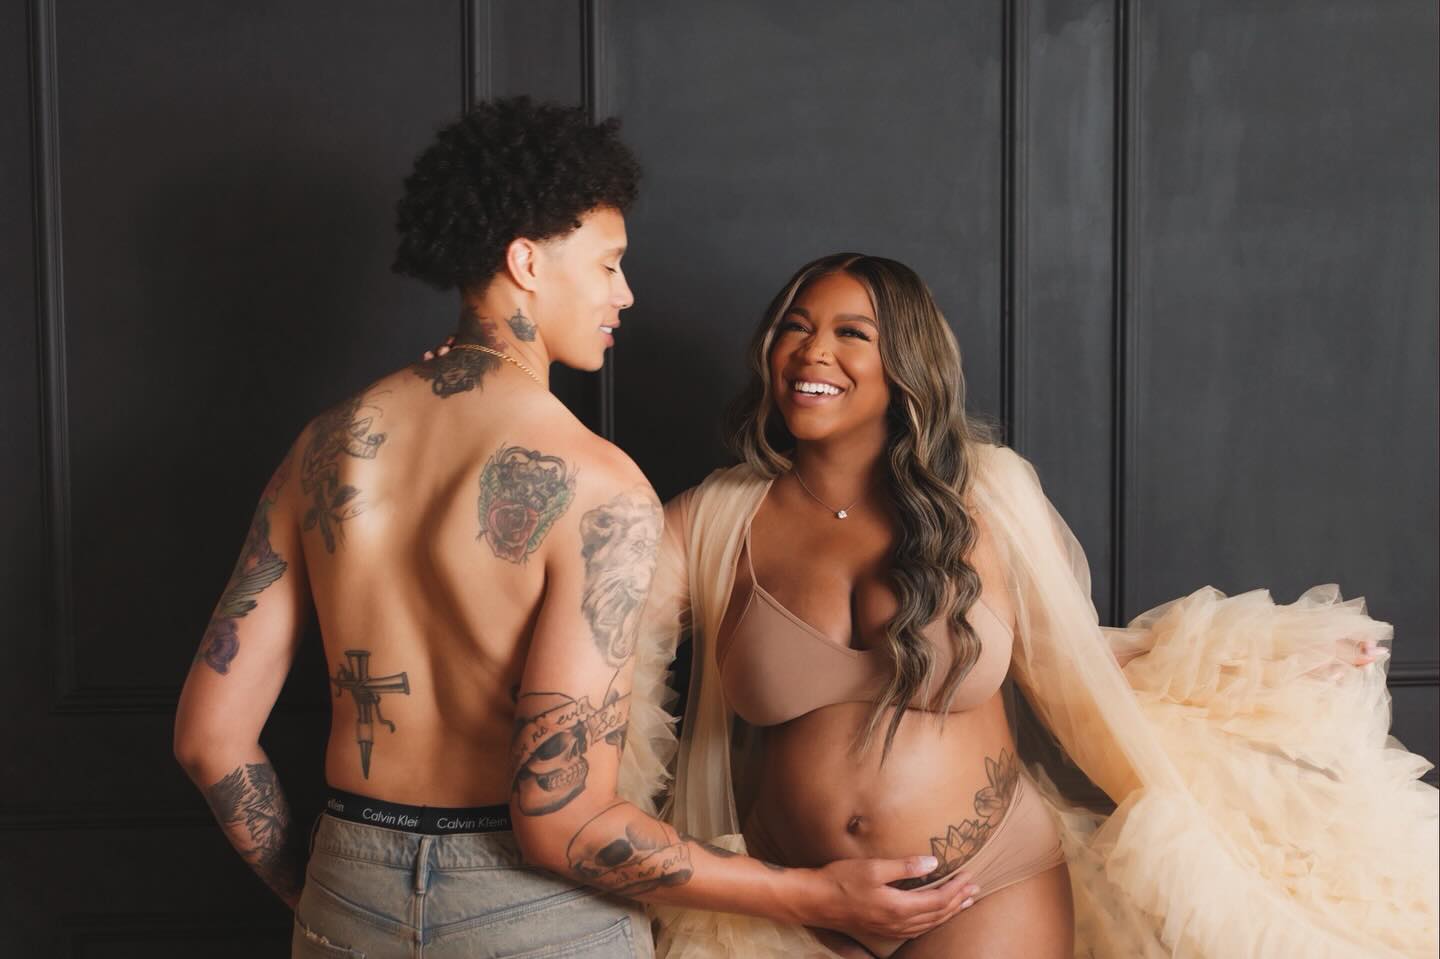 WNBA star Brittney Griner and wife Cherelle are expecting their first child together